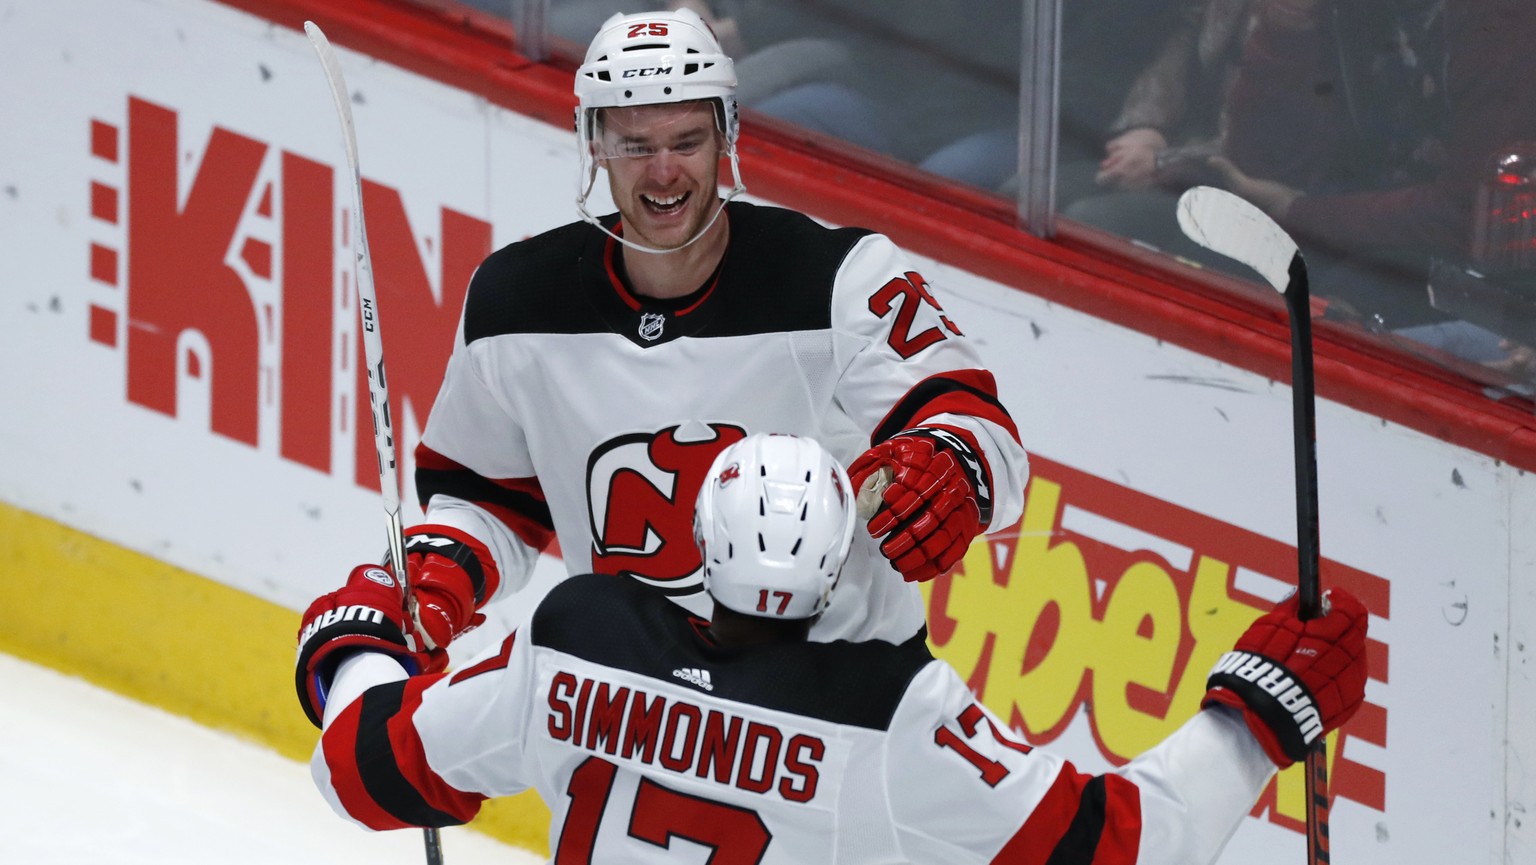 New Jersey Devils defenseman Mirco Mueller, back, celebrates scoring a goal with right wing Wayne Simmonds in the third period of an NHL hockey game against the Colorado Avalanche Friday, Dec. 13, 201 ...